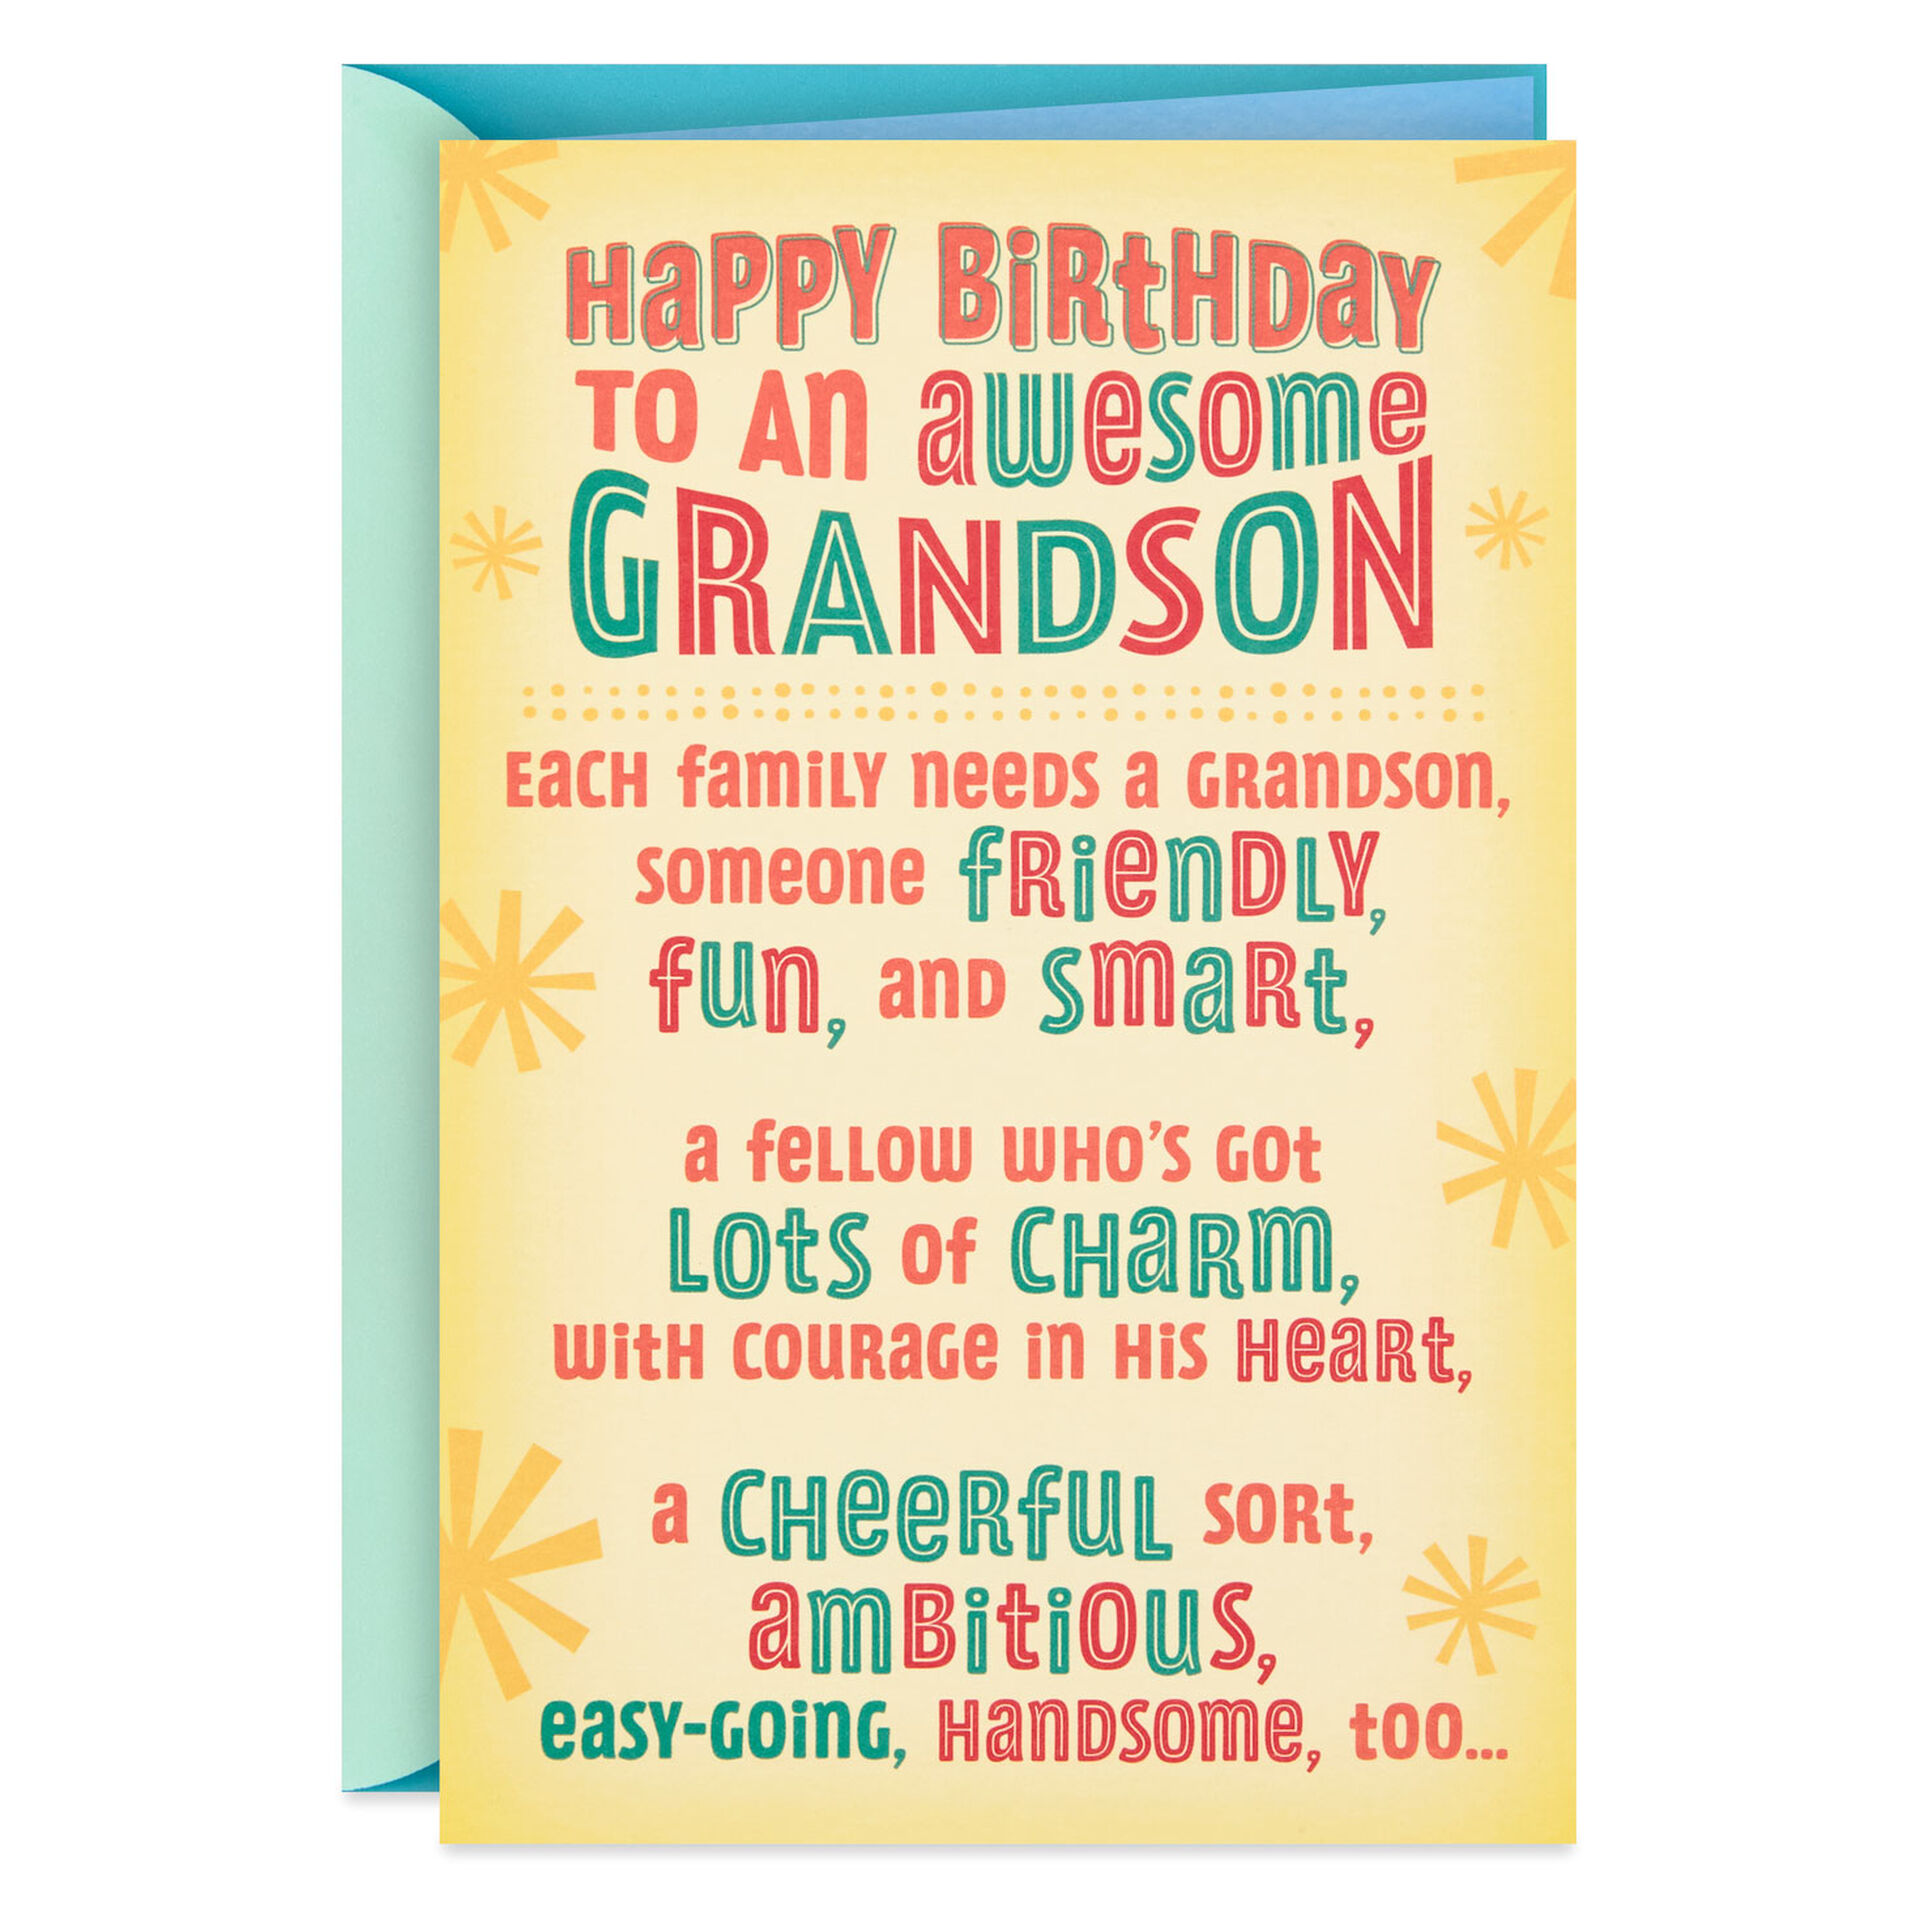 grandson-birthday-card-home-furniture-diy-celebrations-occasions